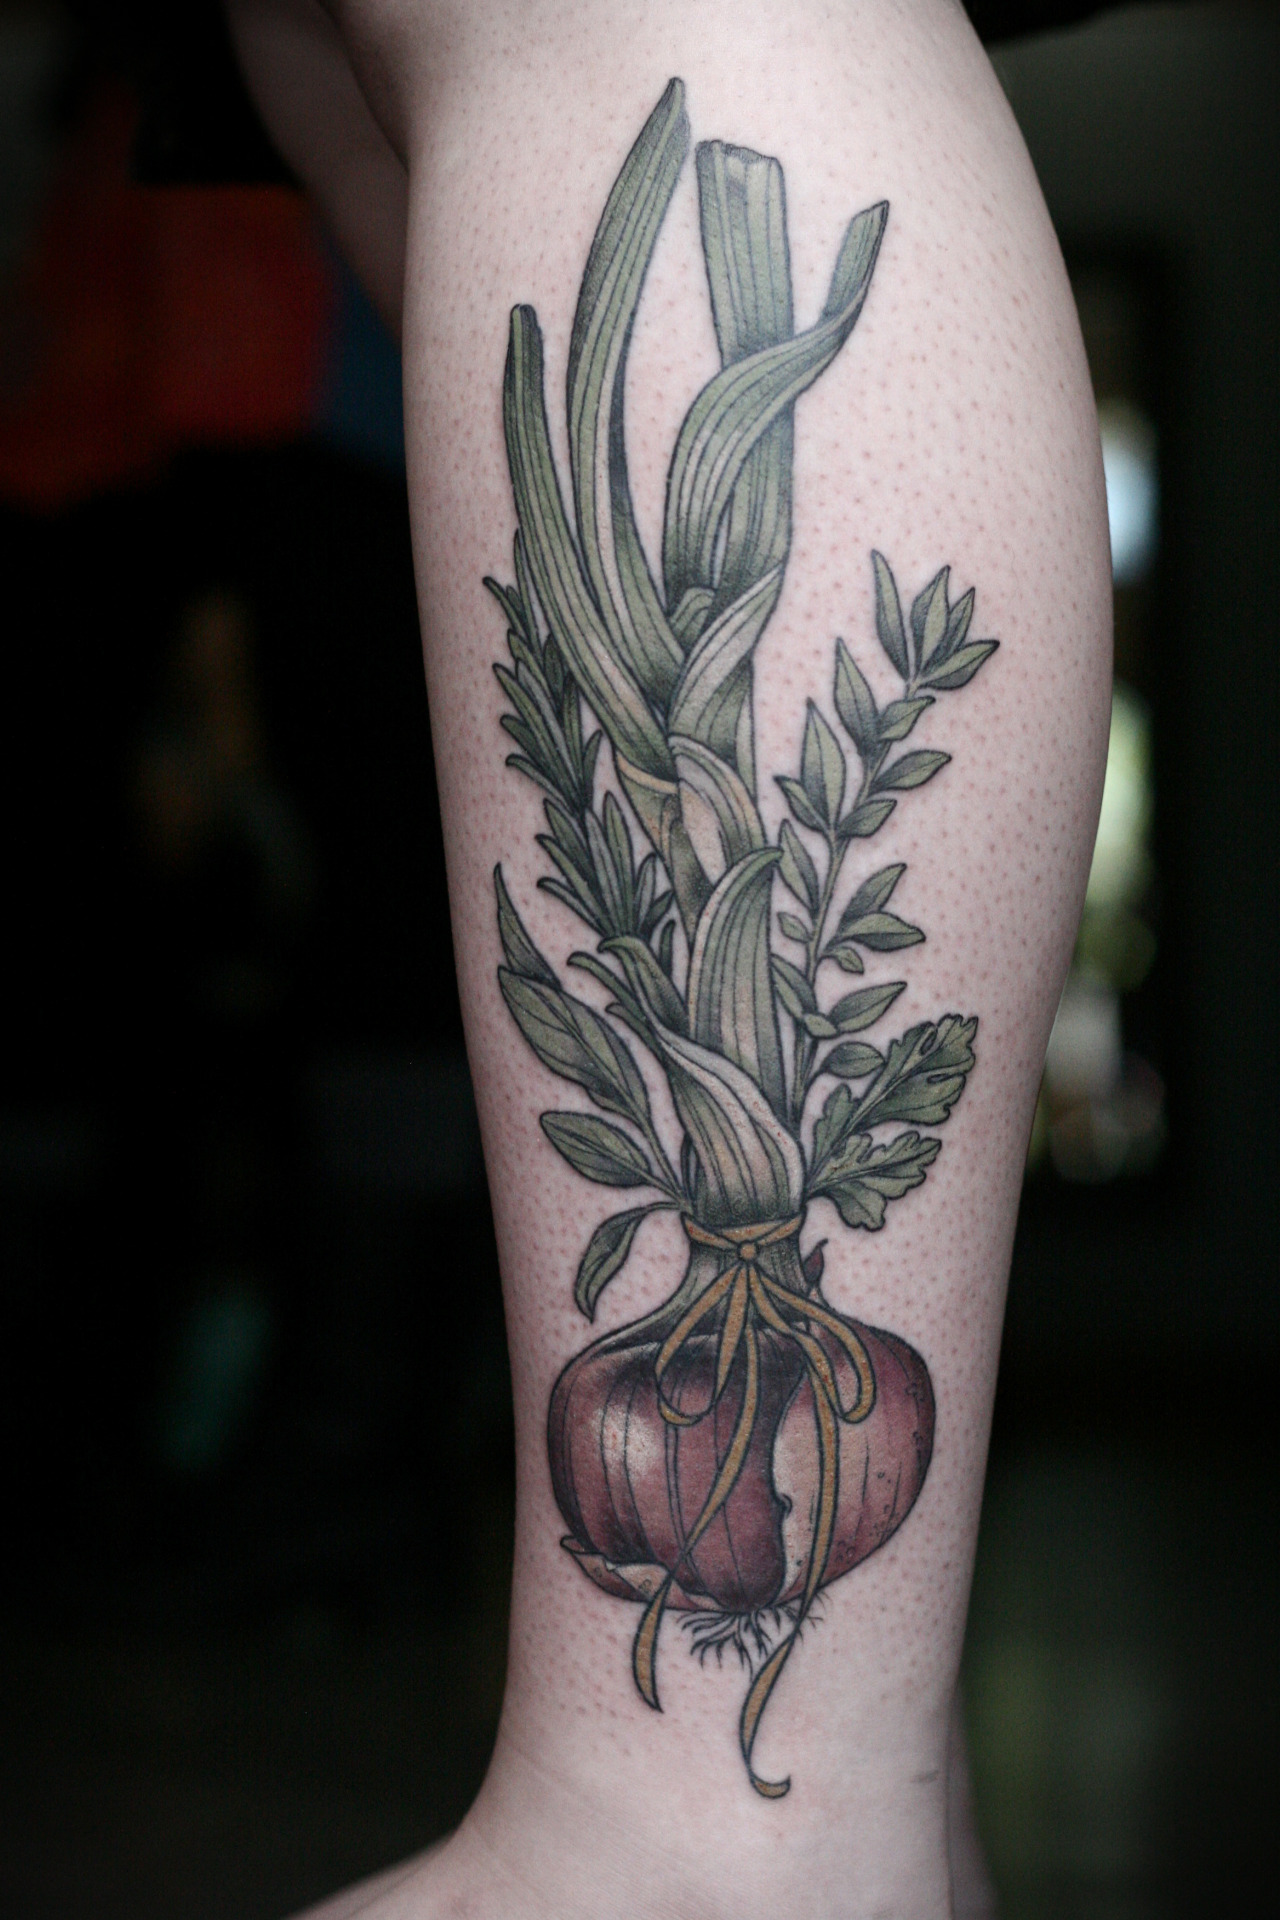 Kirsten Makes Tattoos Red Onion With Parsley Sage Rosemary And Thyme,Citric Acid Cycle Diagram